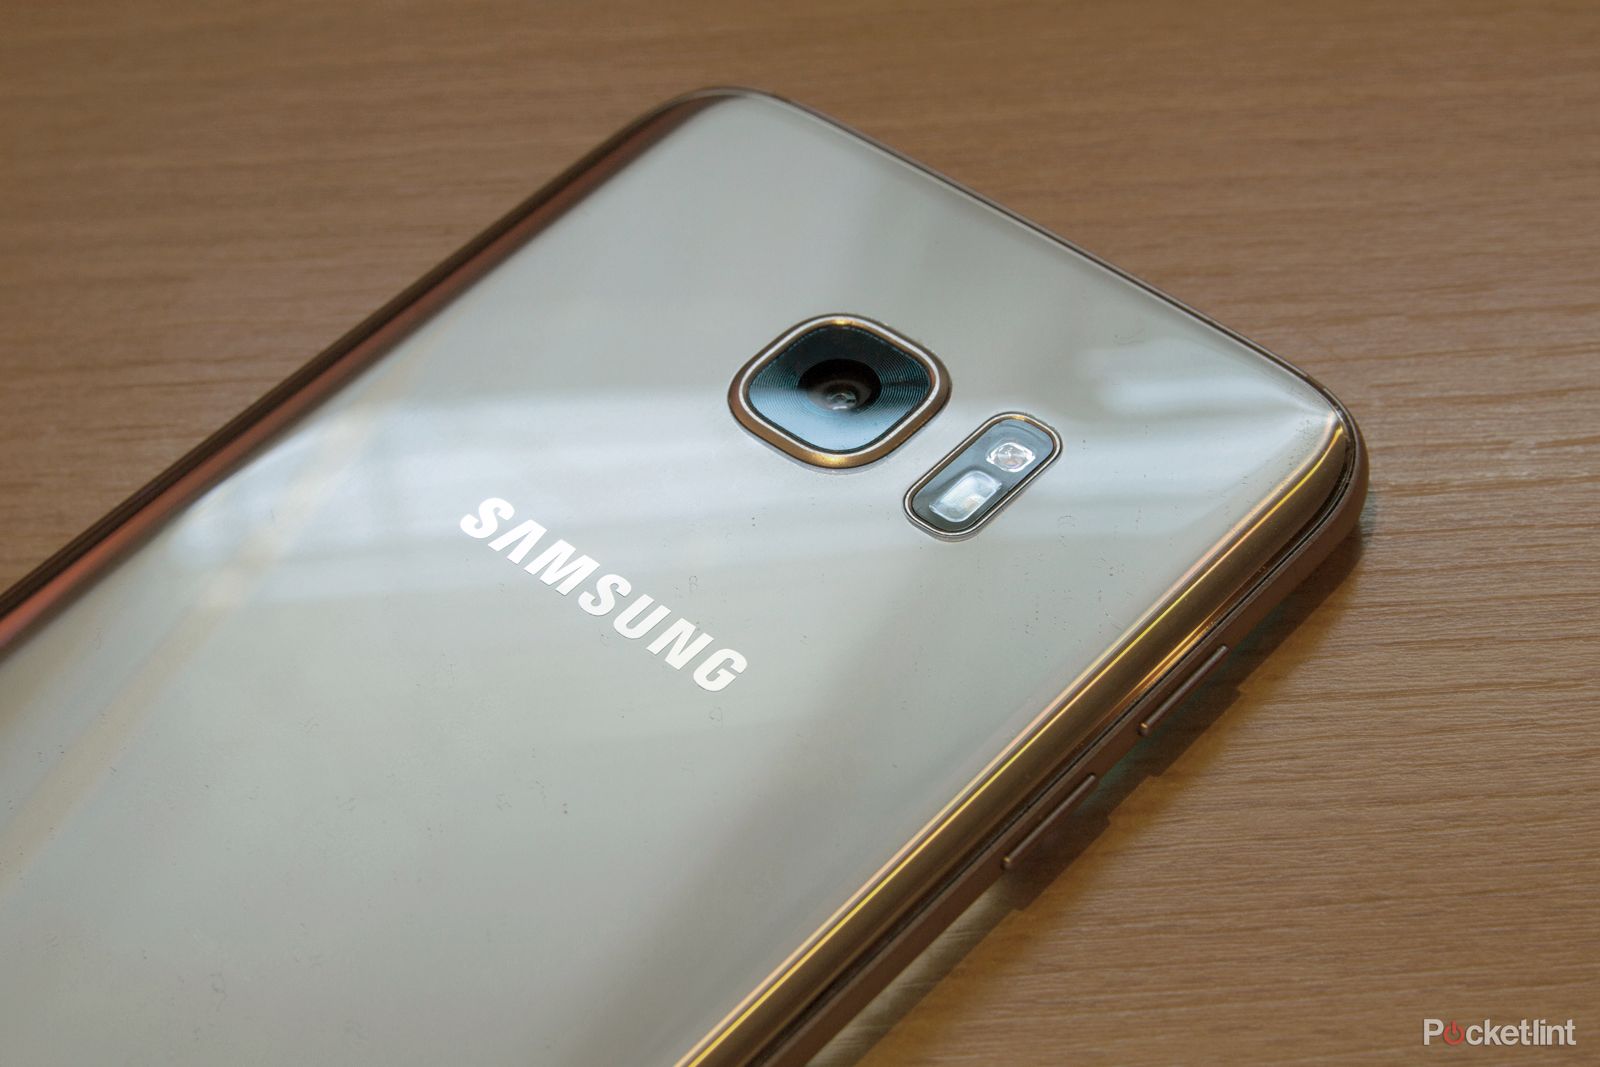 samsung galaxy s8 release date revealed not expected to be brought forward image 1